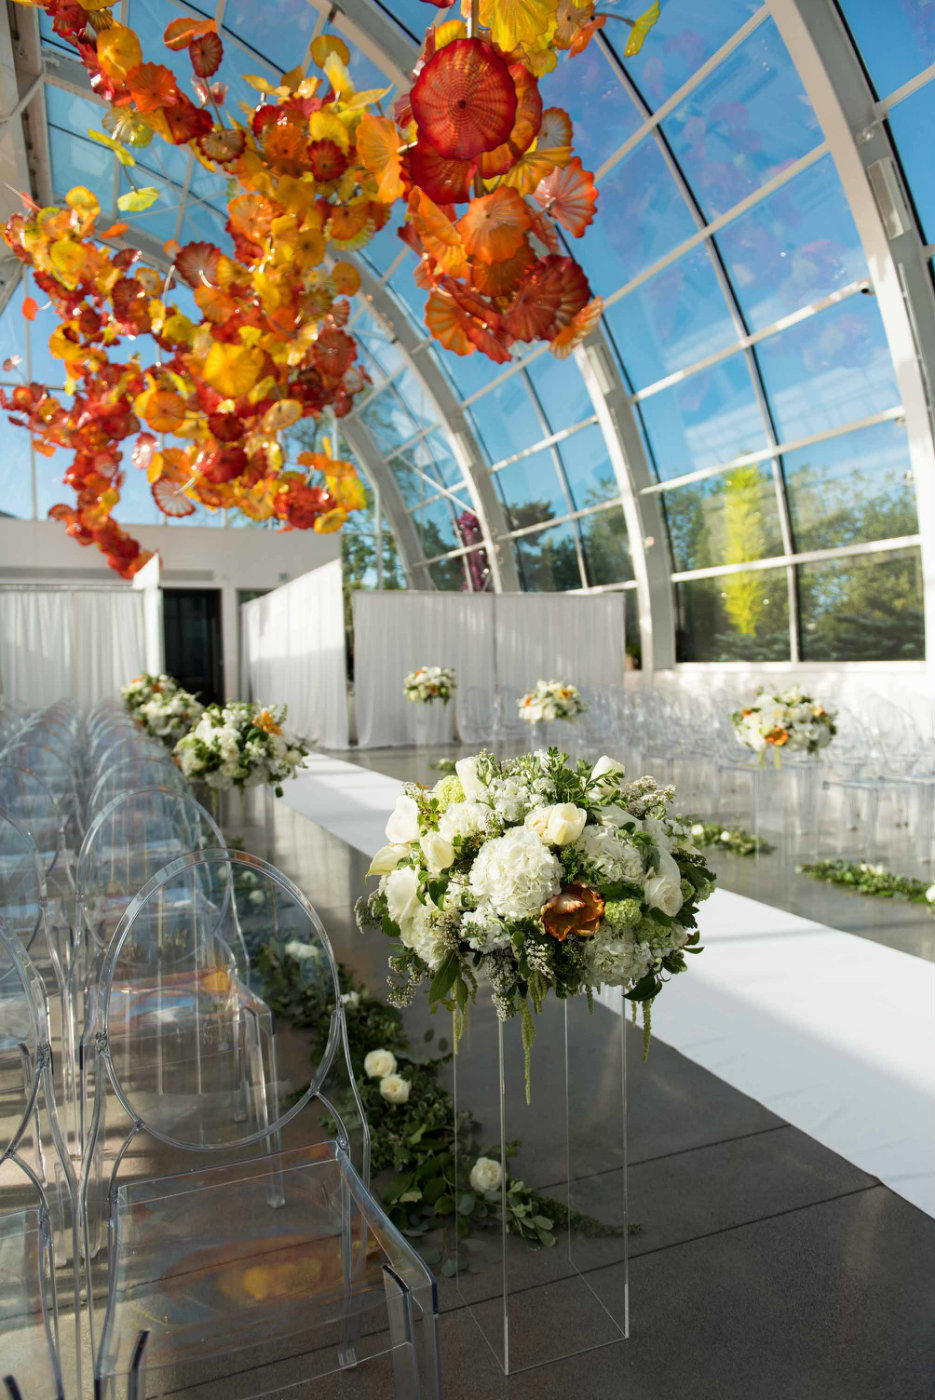 White and green flowers with pops of orange are propped up on lucite stands along the aisle.